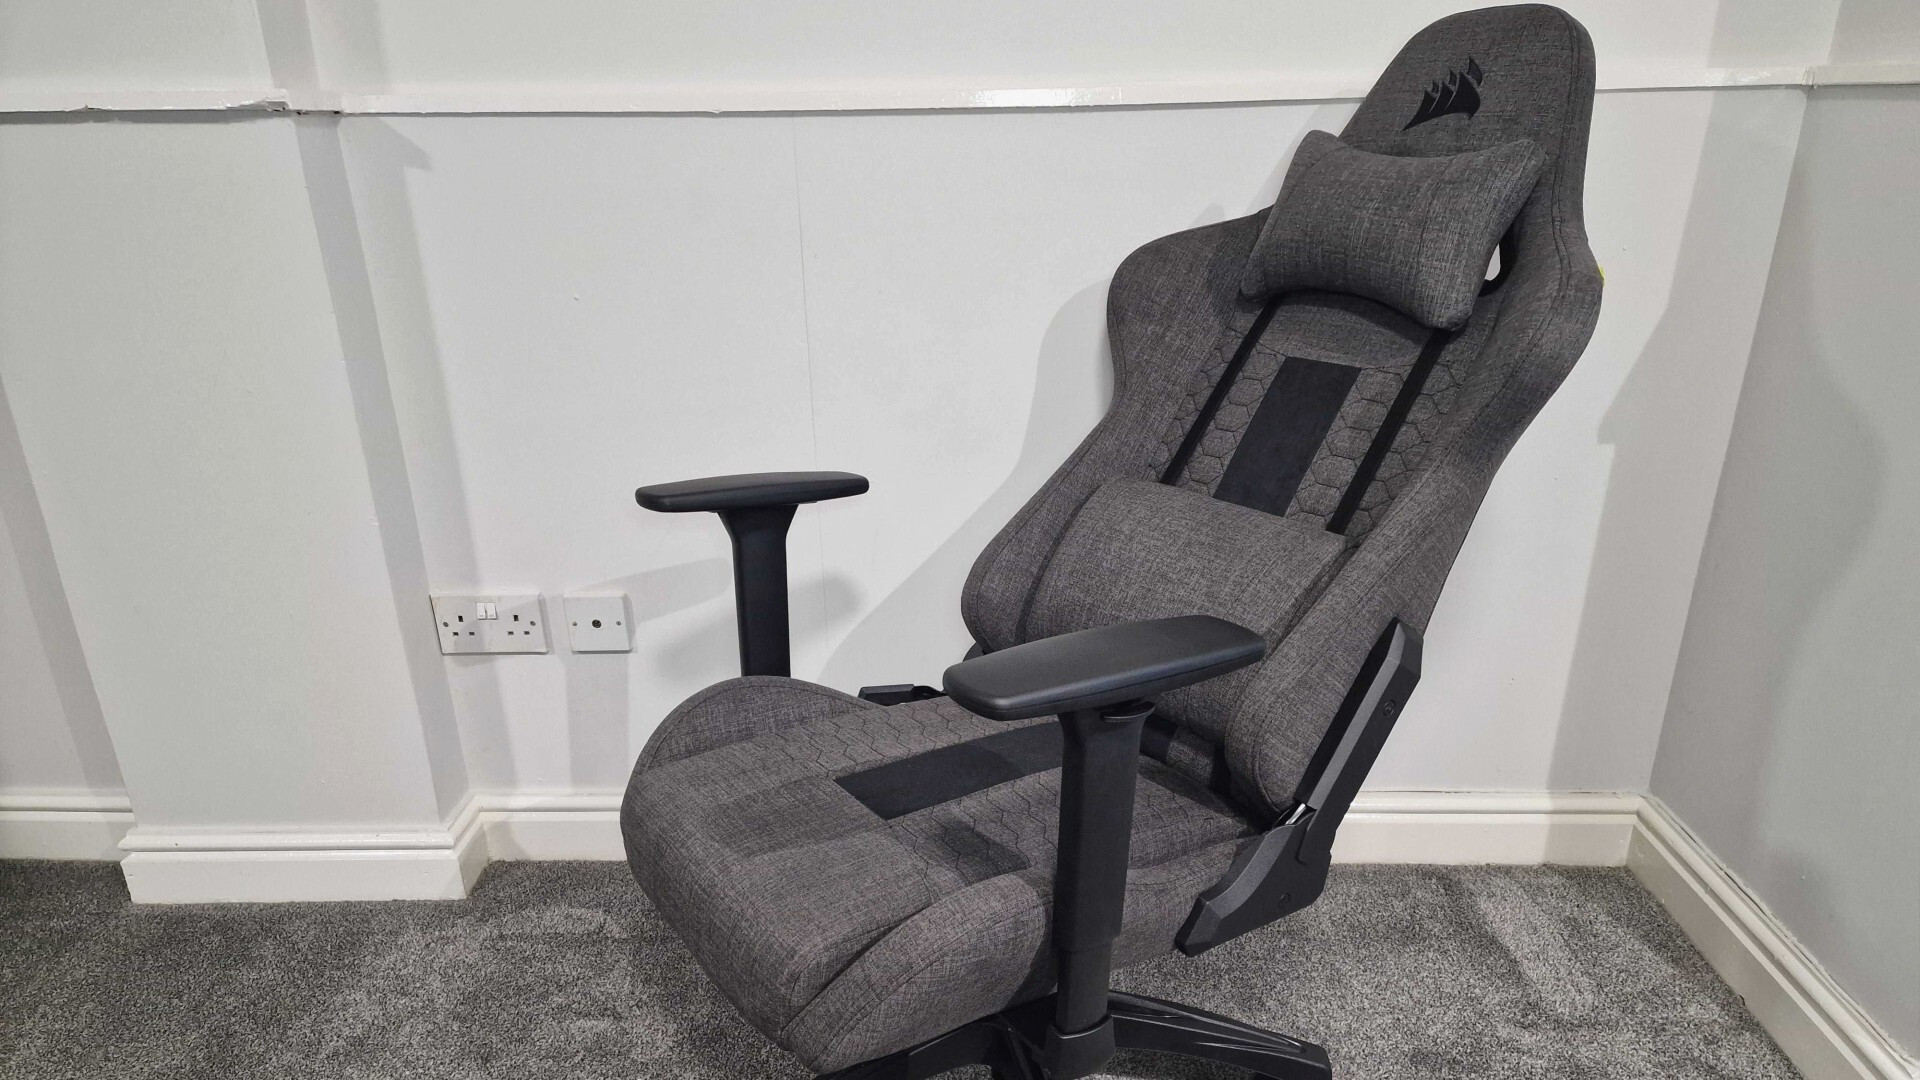 Best gaming chair for most people, the Corsair TC100 Relaxed, looking relaxed in a room.